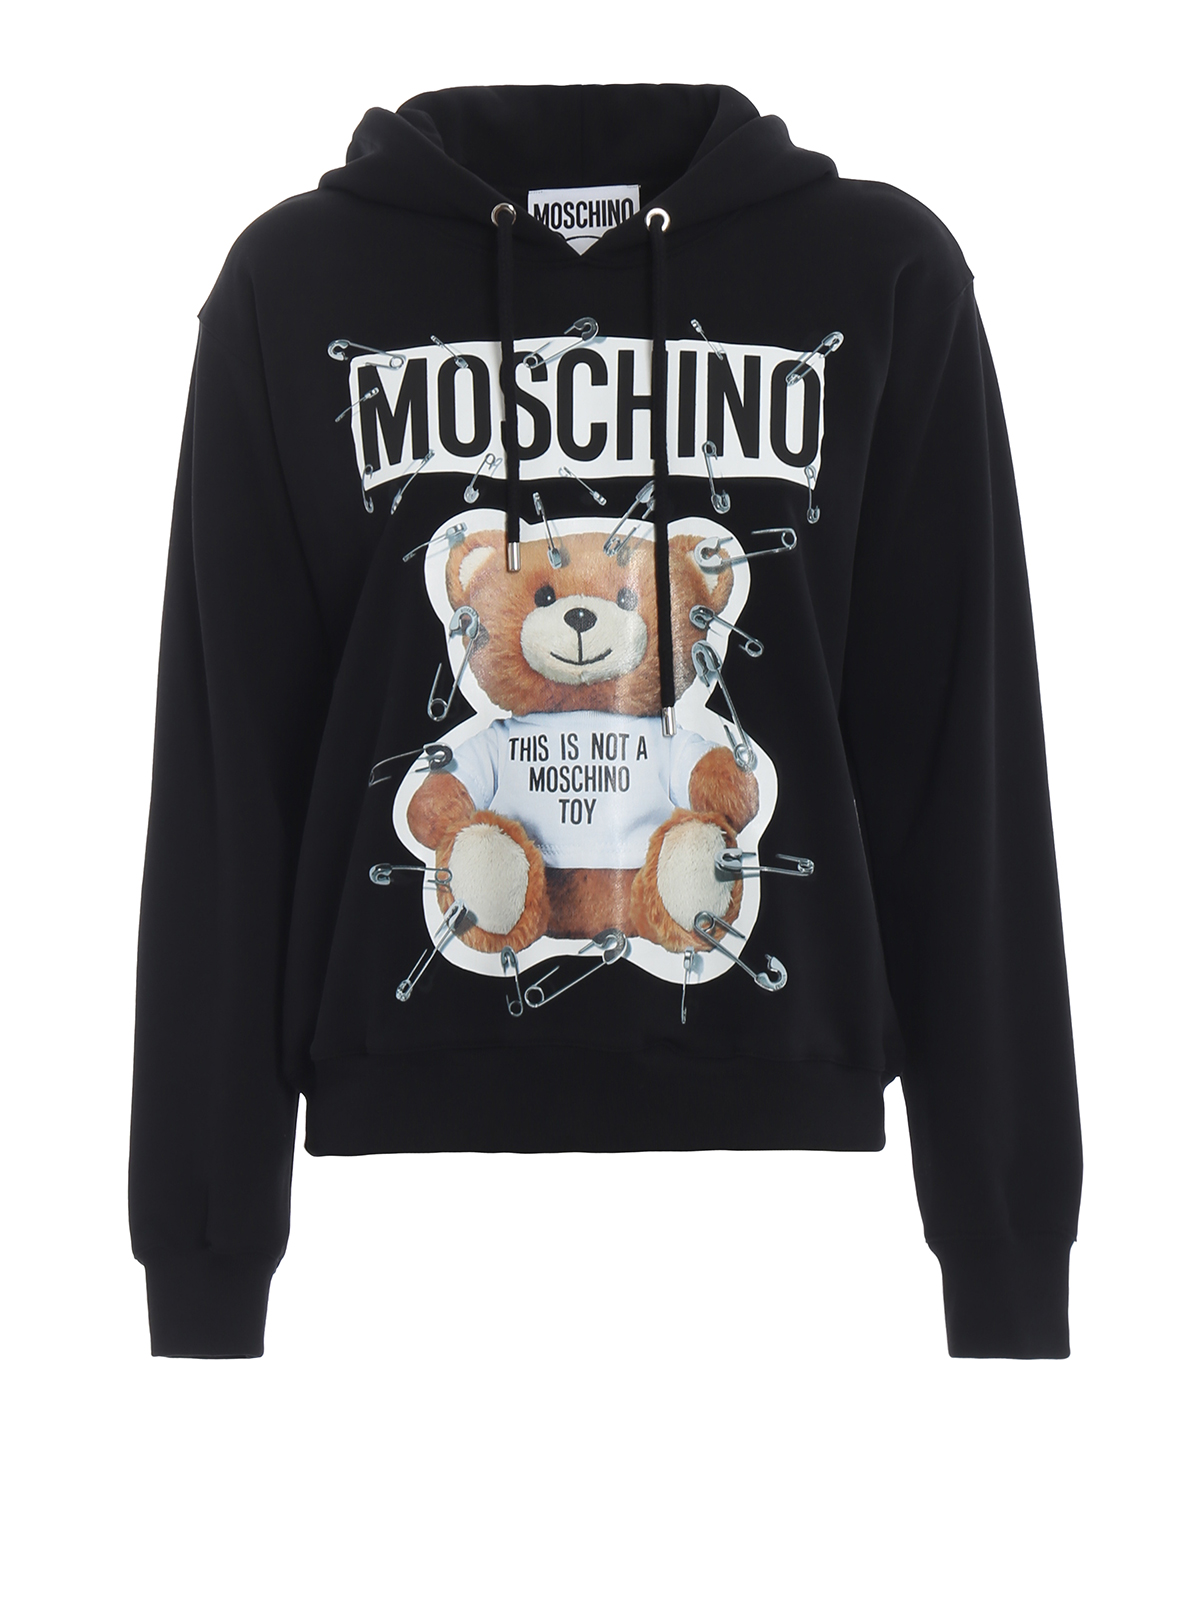 This is not a Moschino toy black hoodie 